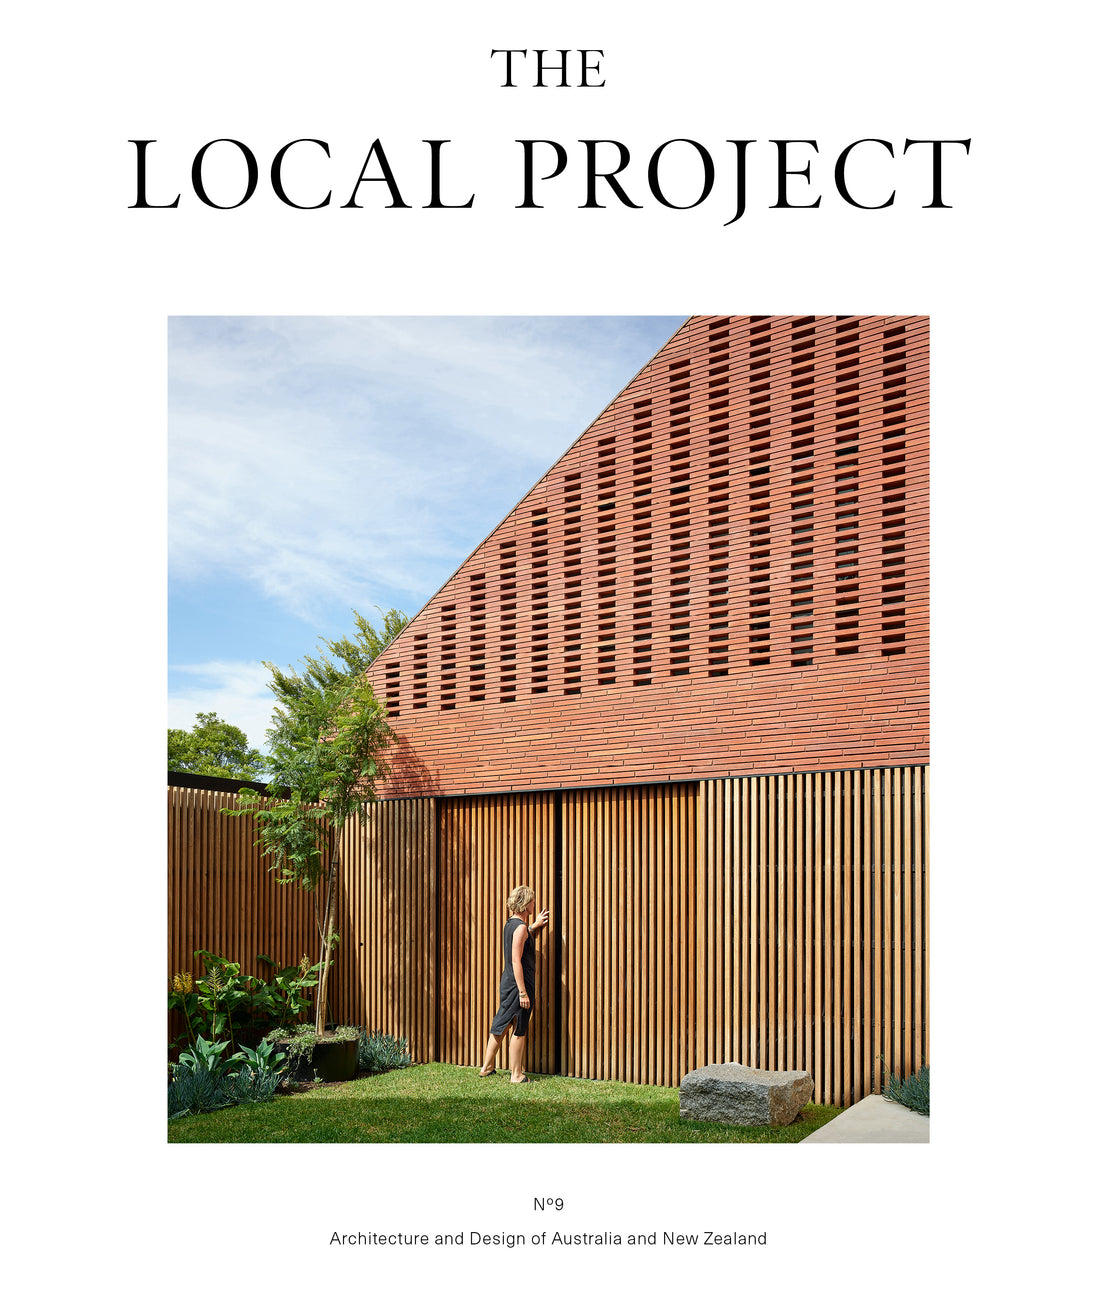 New Publication: The Local Project